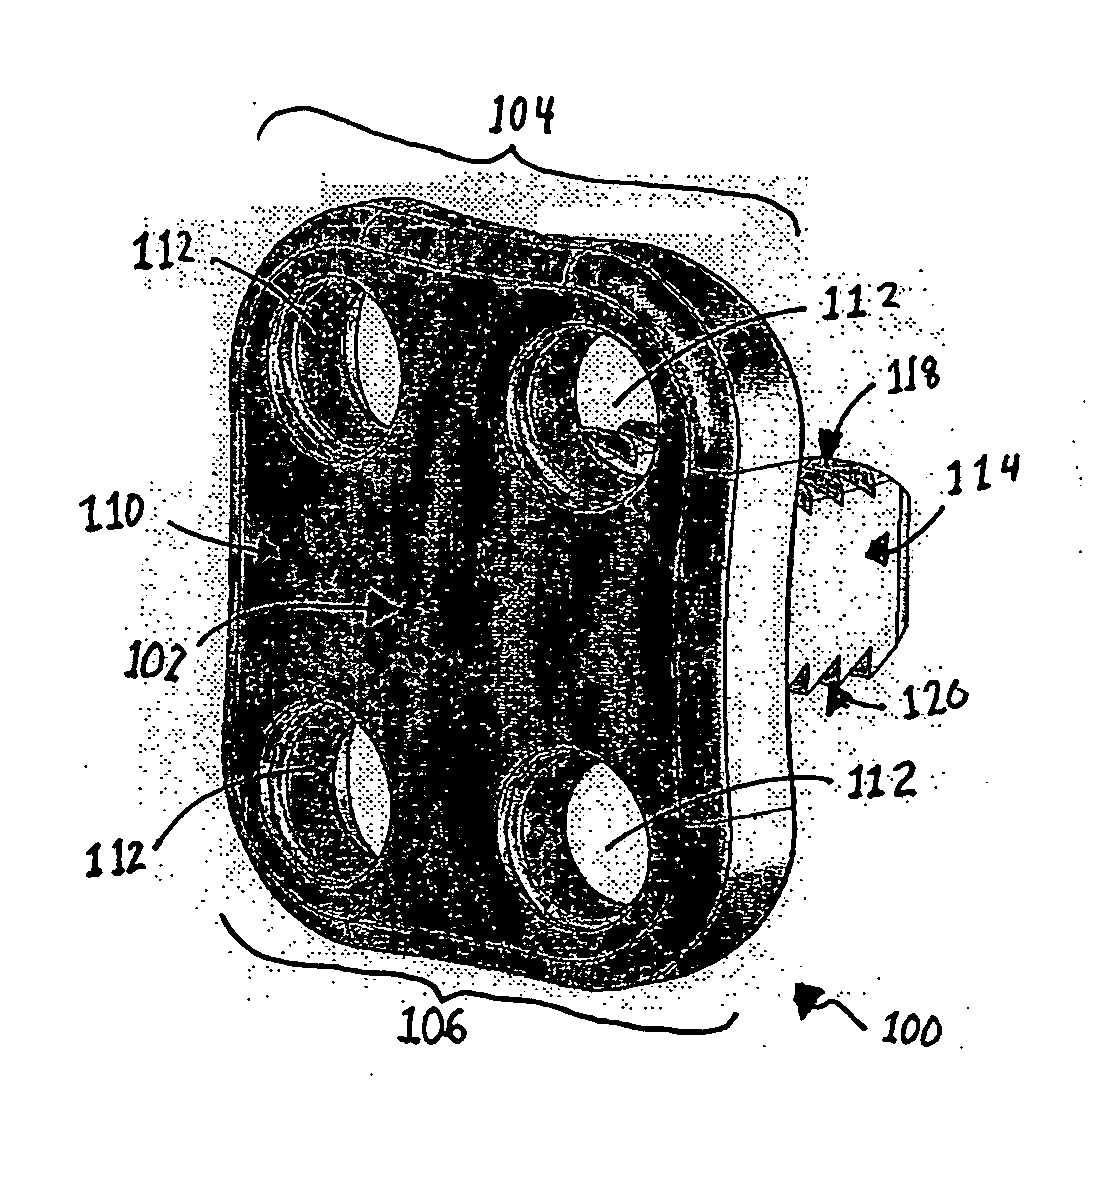 Flanged interbody fusion device with locking plate